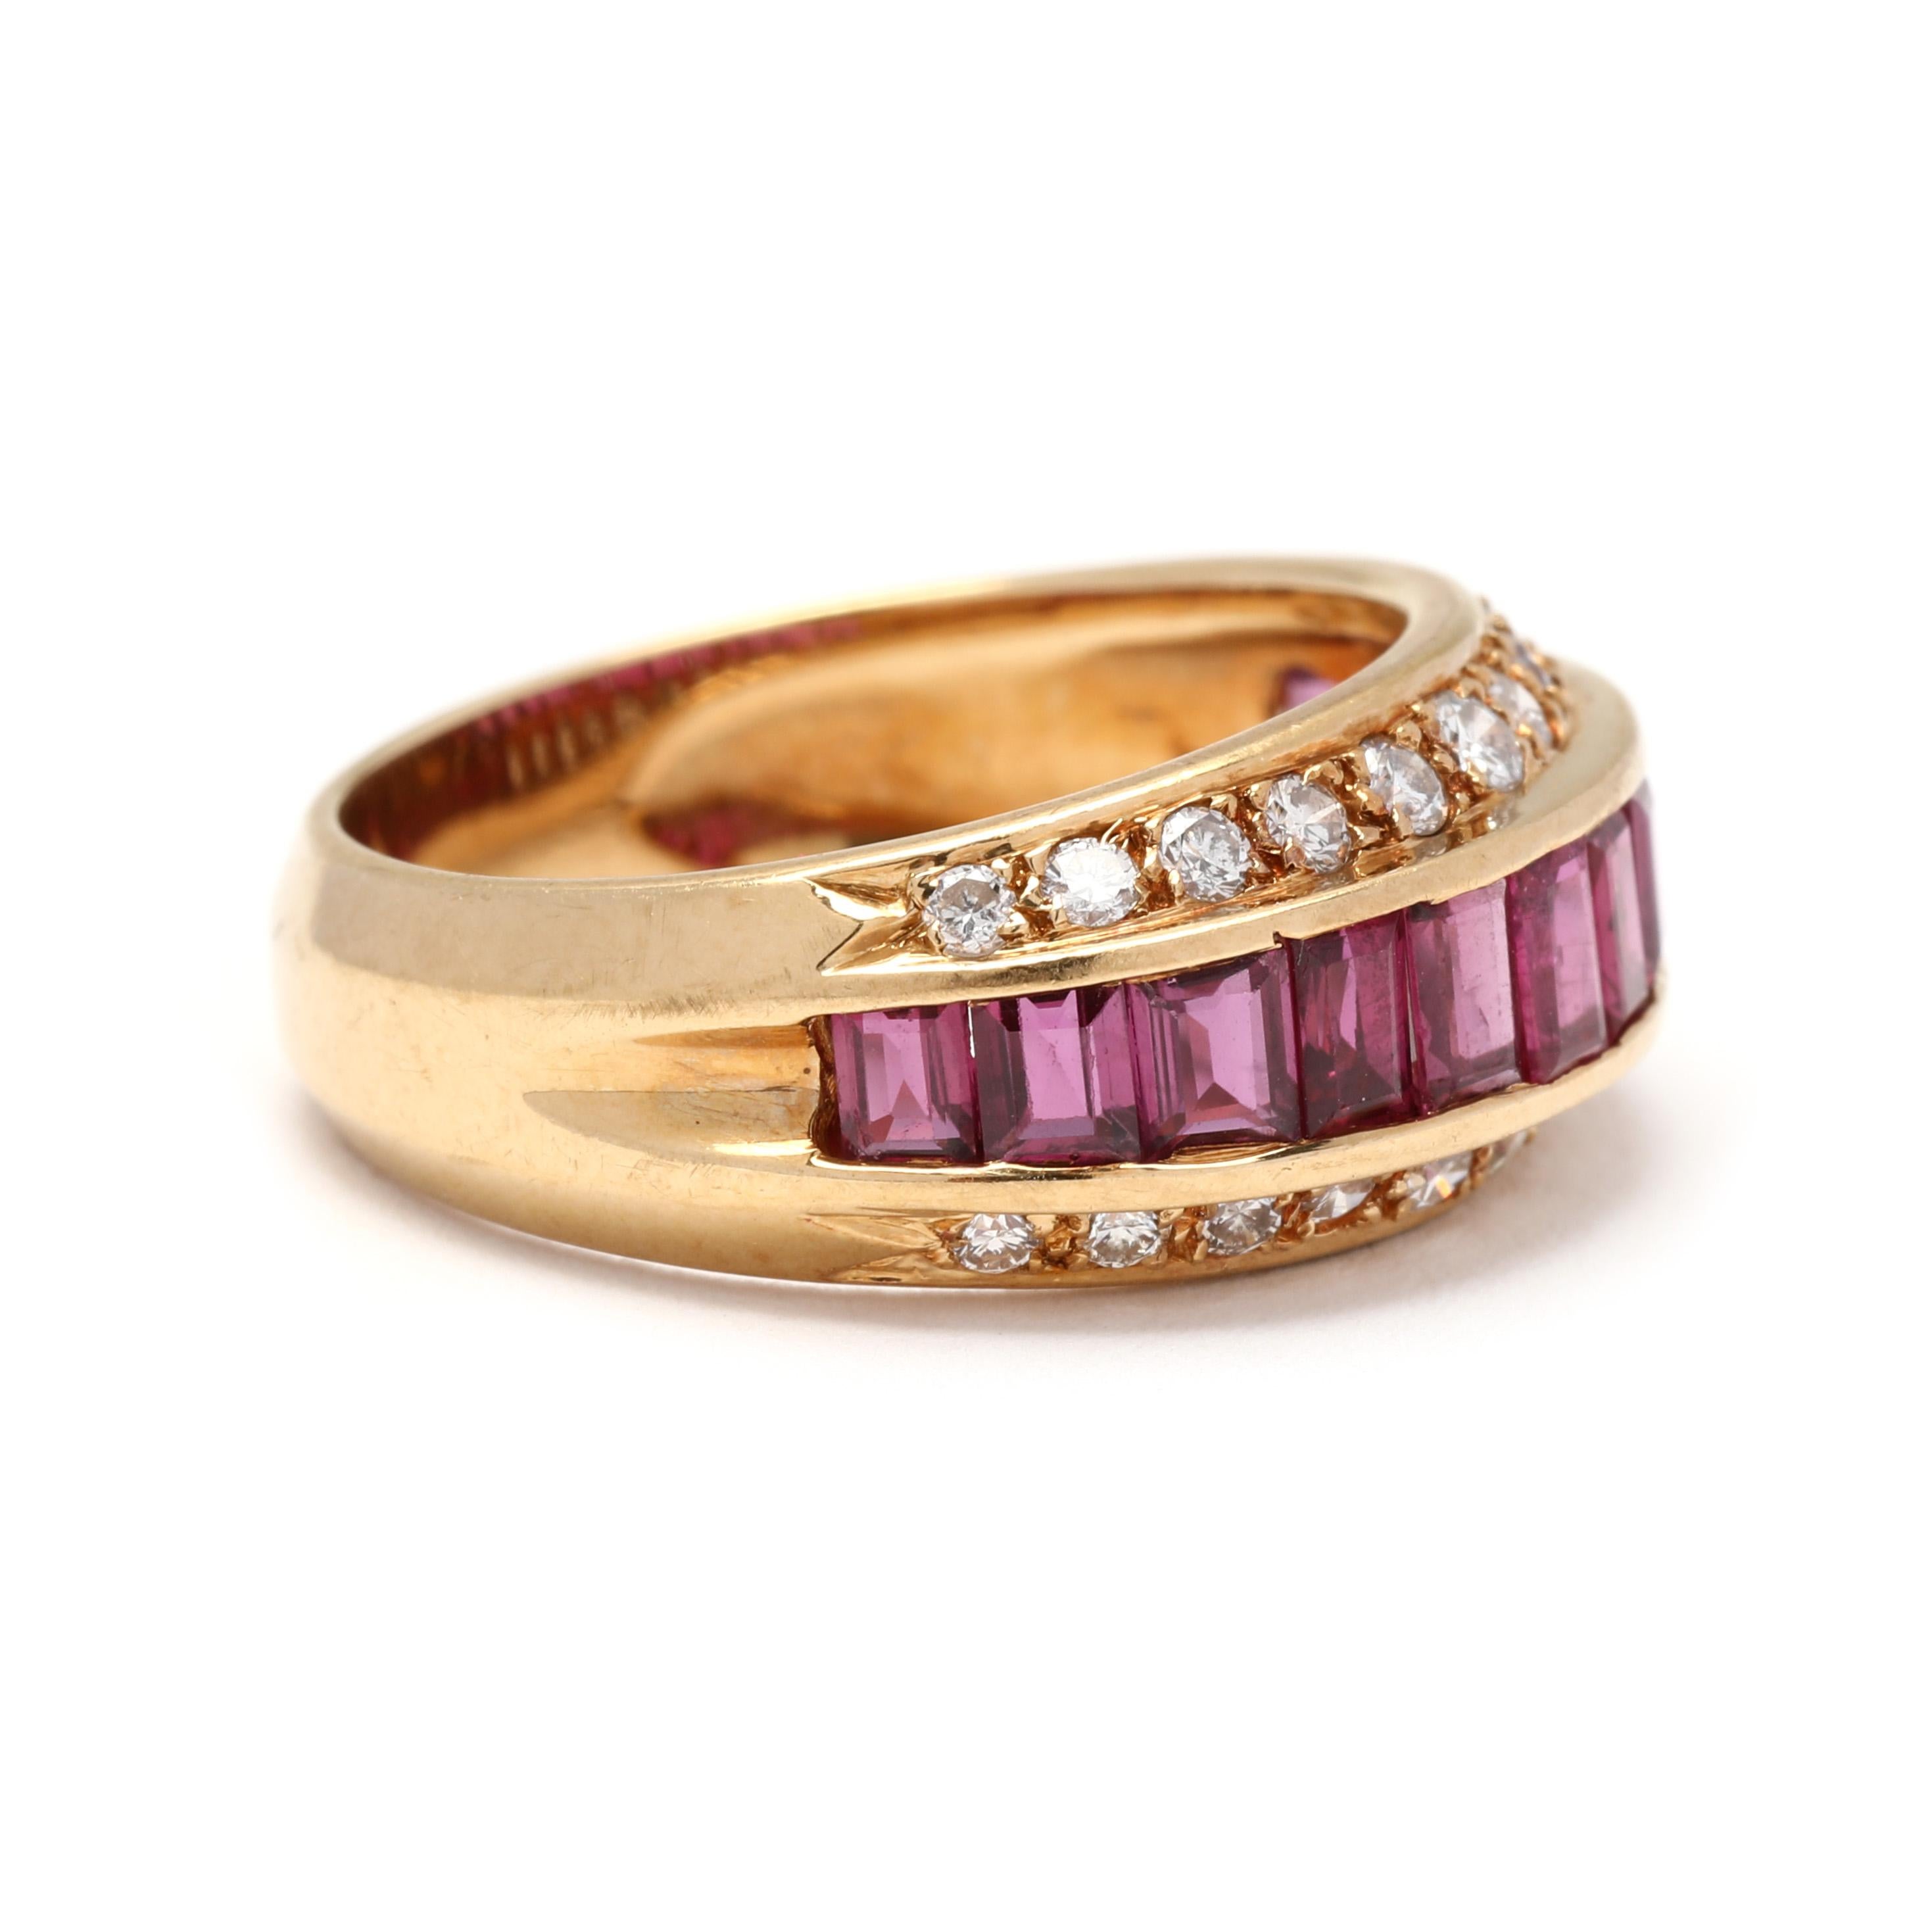 This 14k yellow gold diamond and ruby band ring is a stunning and luxurious piece of jewelry. Crafted with high-quality gold, this ring features a row of alternating baguette-cut rubies and round-cut diamonds, creating a captivating and eye-catching